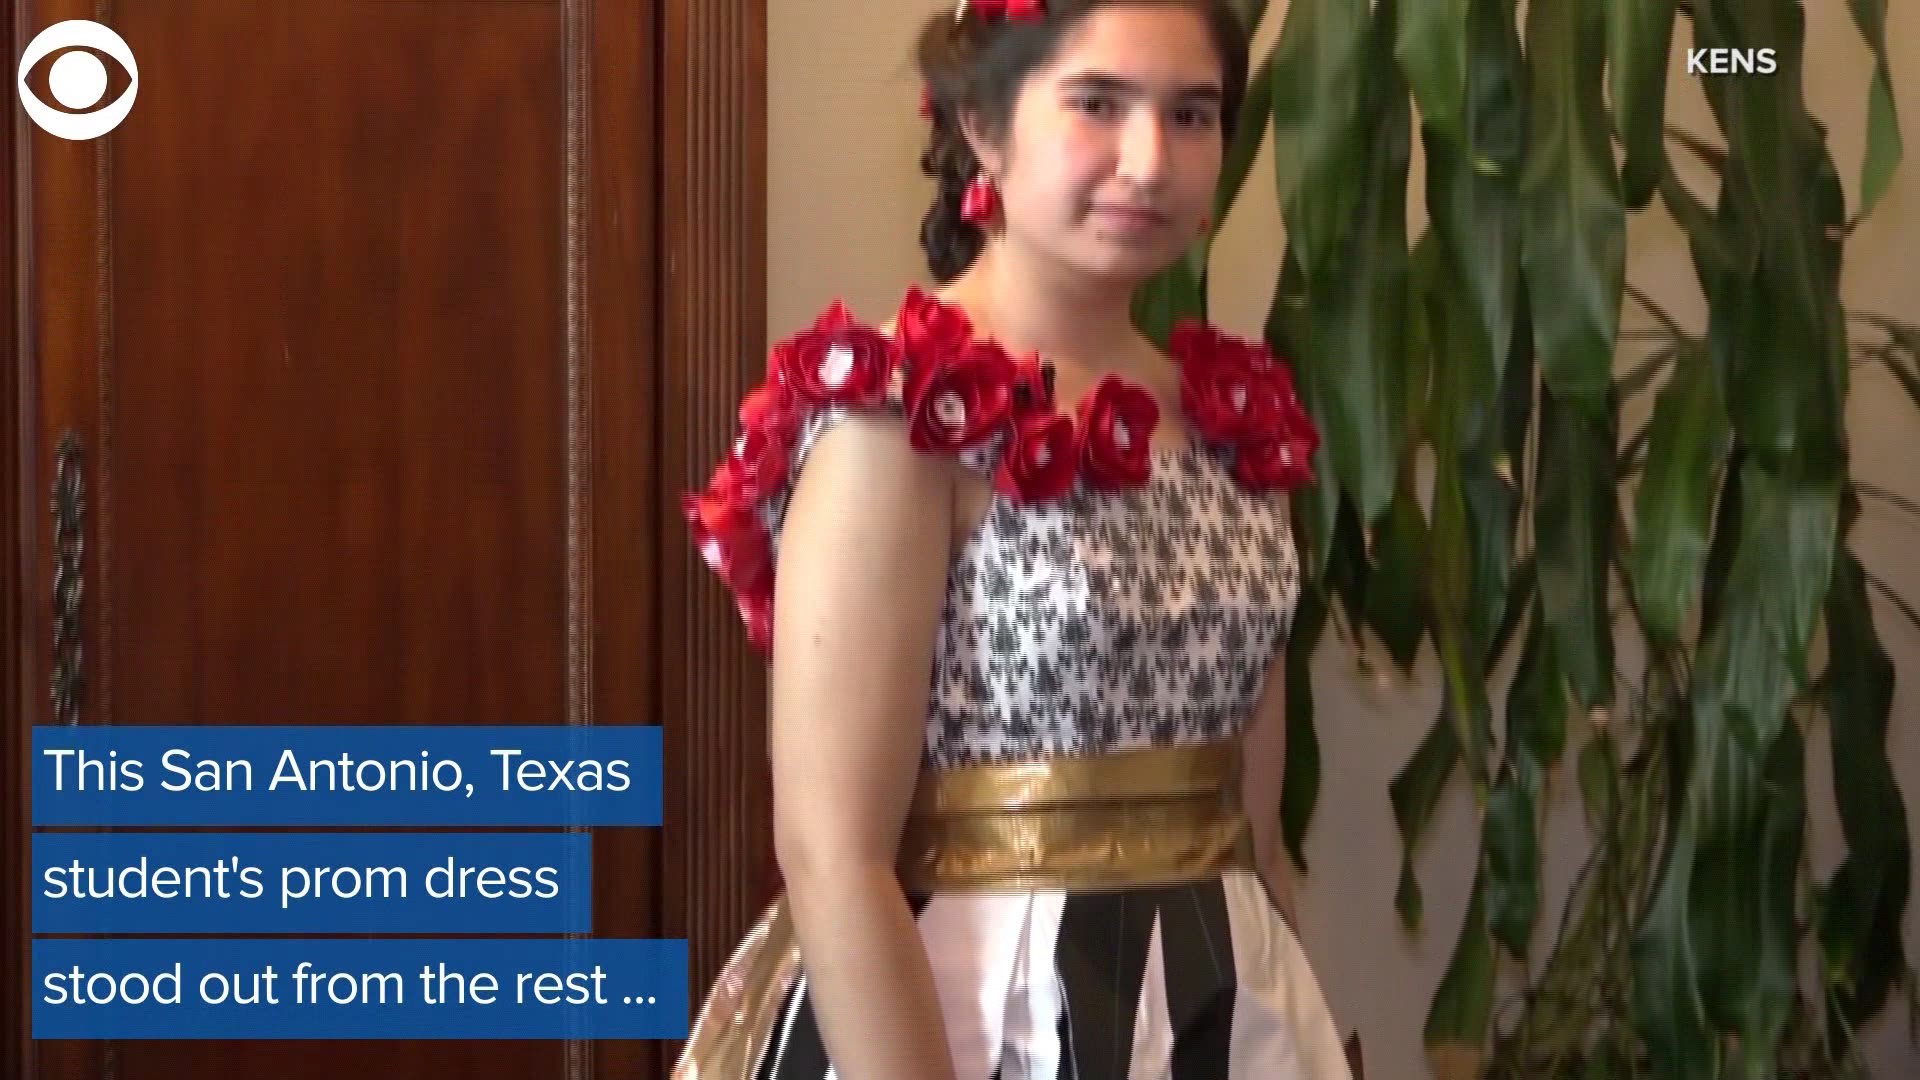 A San Antonio, Texas student's unique, handmade prom dress could help her pay for her college education. Take a look at the duct tape creation that took 60 hours to make.